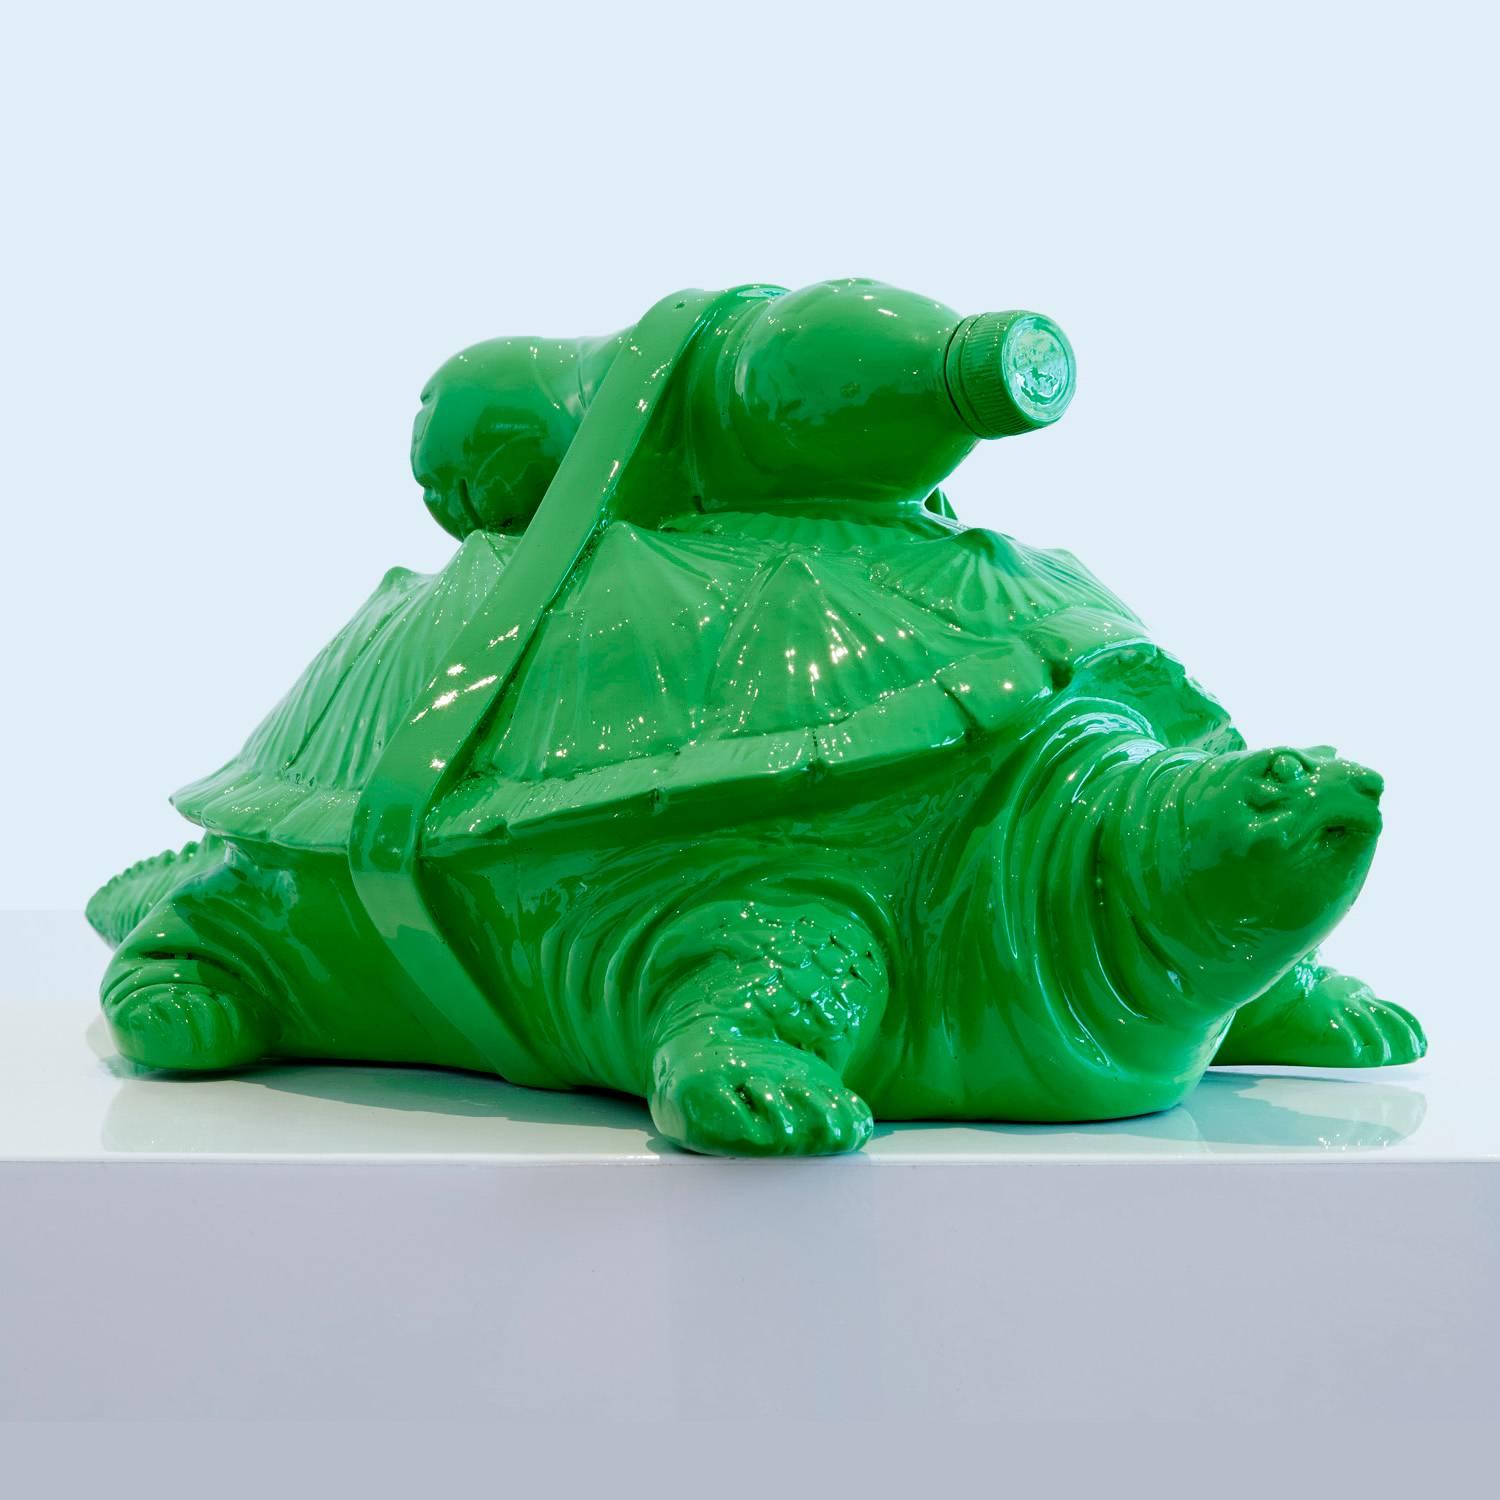 Cloned Turtle with pet bottle. - Sculpture by William Sweetlove